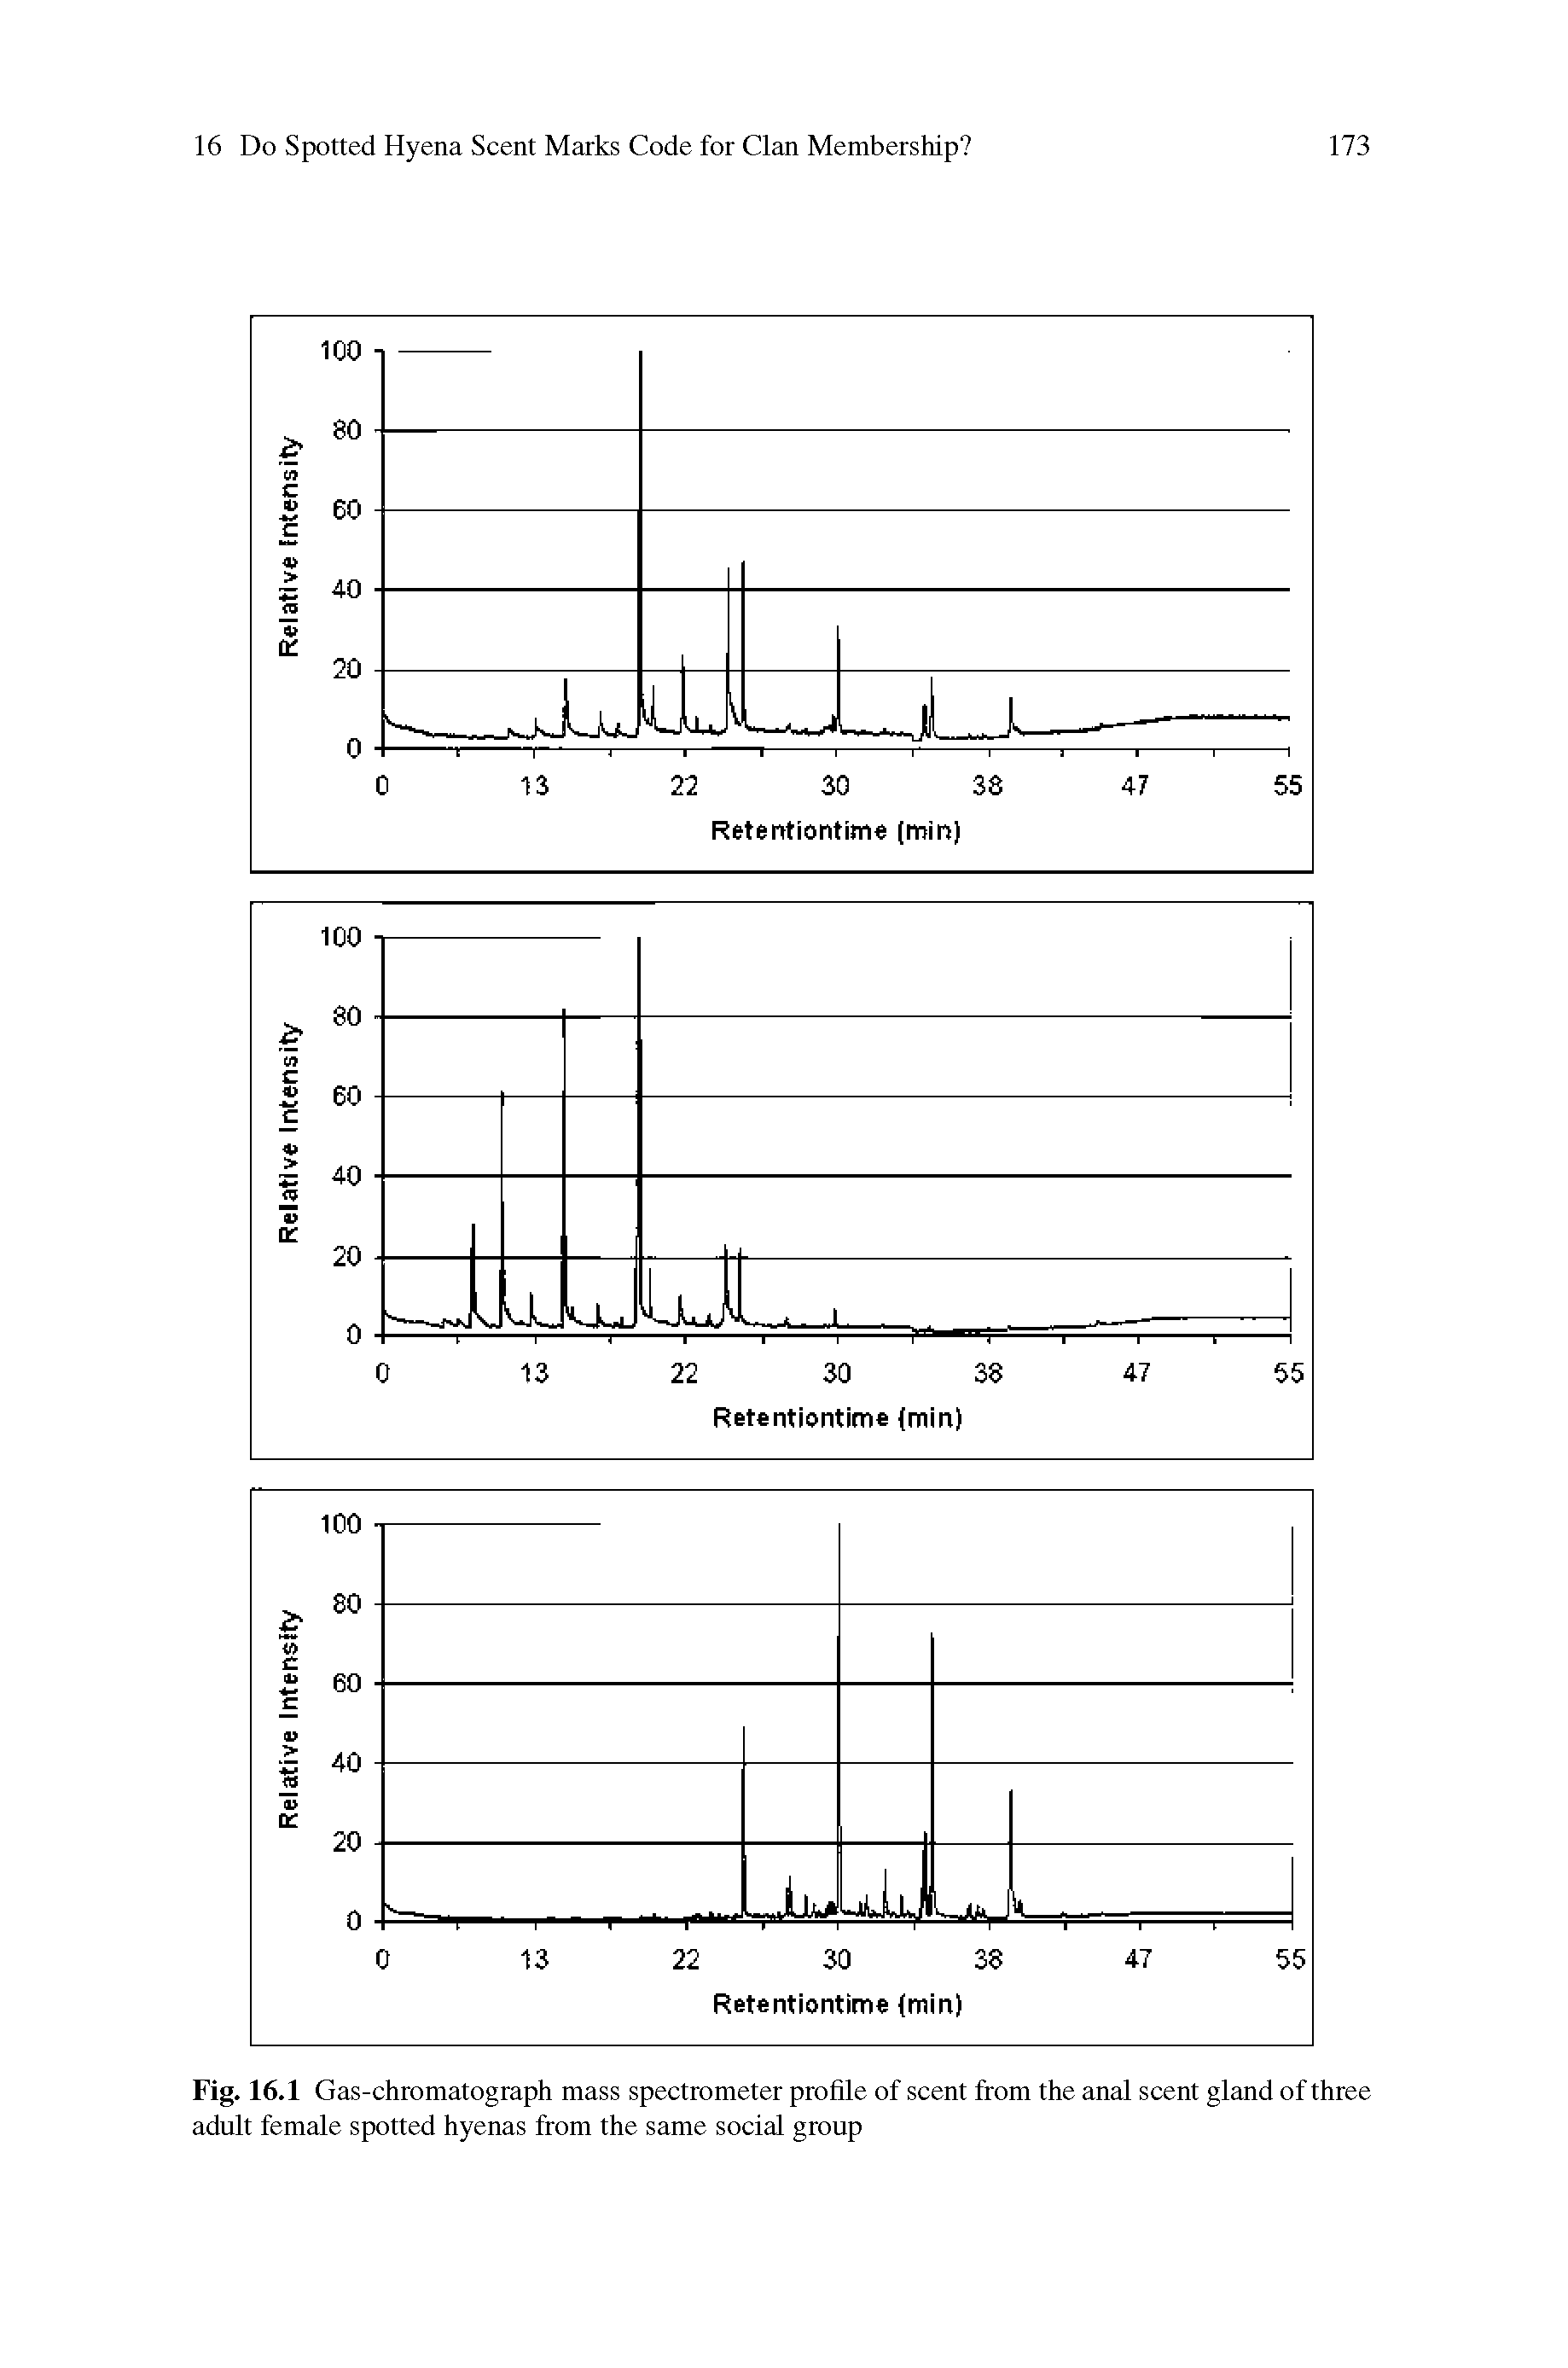 Fig. 16.1 Gas-chromatograph mass spectrometer profile of scent from the anal scent gland of three adult female spotted hyenas from the same social group...